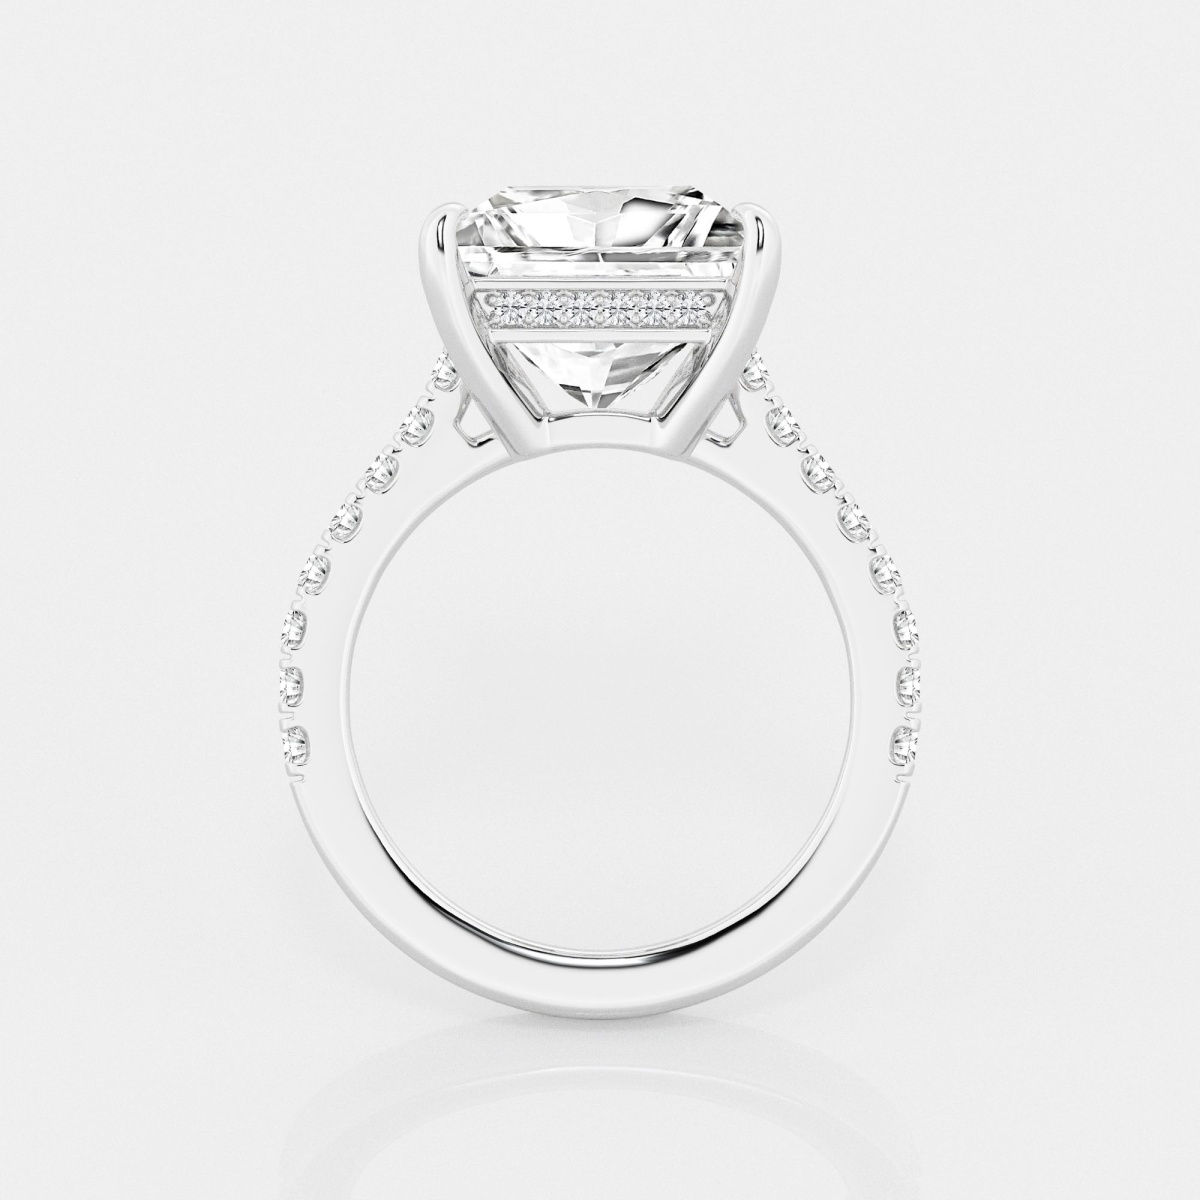 Additional Image 1 for  Badgley Mischka Colorless 4 1/3 ctw Princess Lab Grown Diamond Hidden Halo Engagement Ring